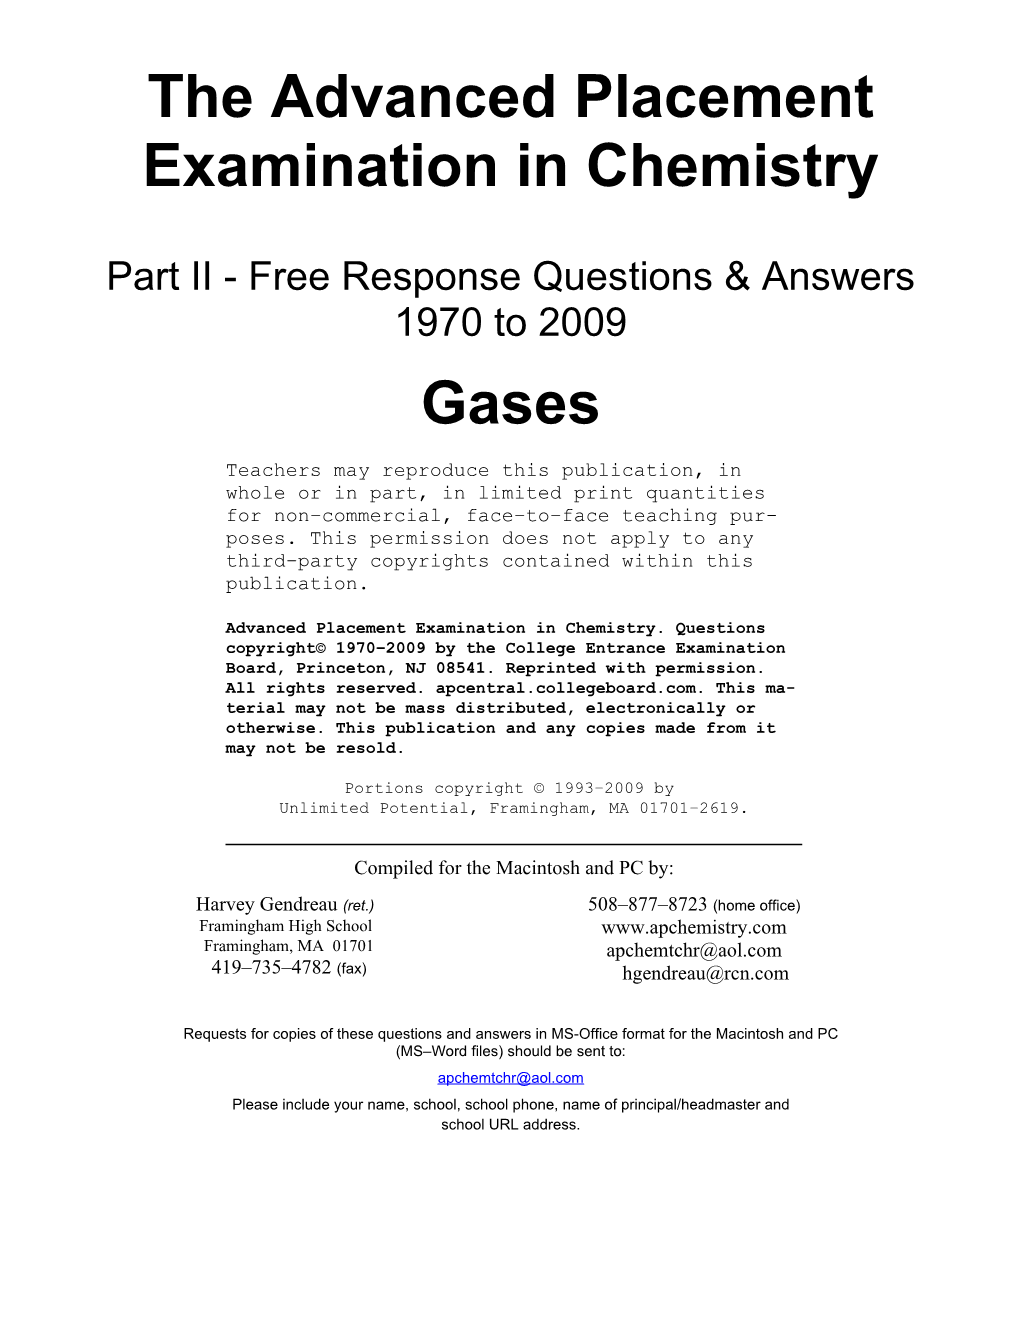 The Advanced Placement Examination in Chemistry s1